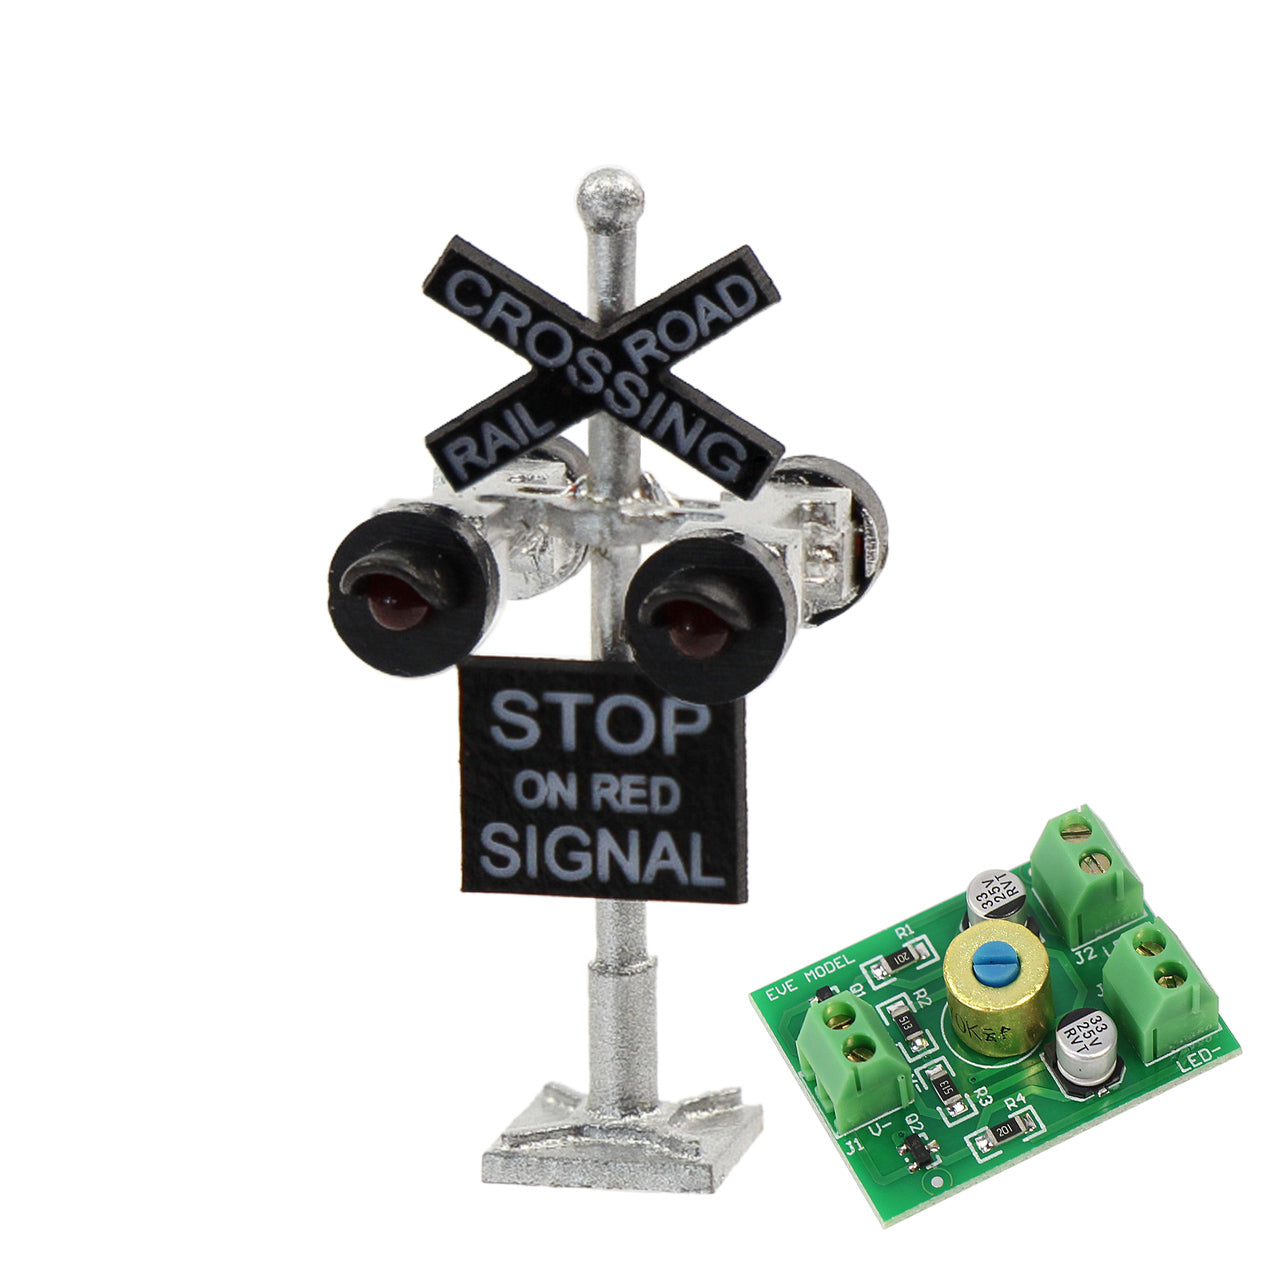 JTD1506RP 1 Set N Scale 1:160 Railway Signal with Circuit Board Flasher LED